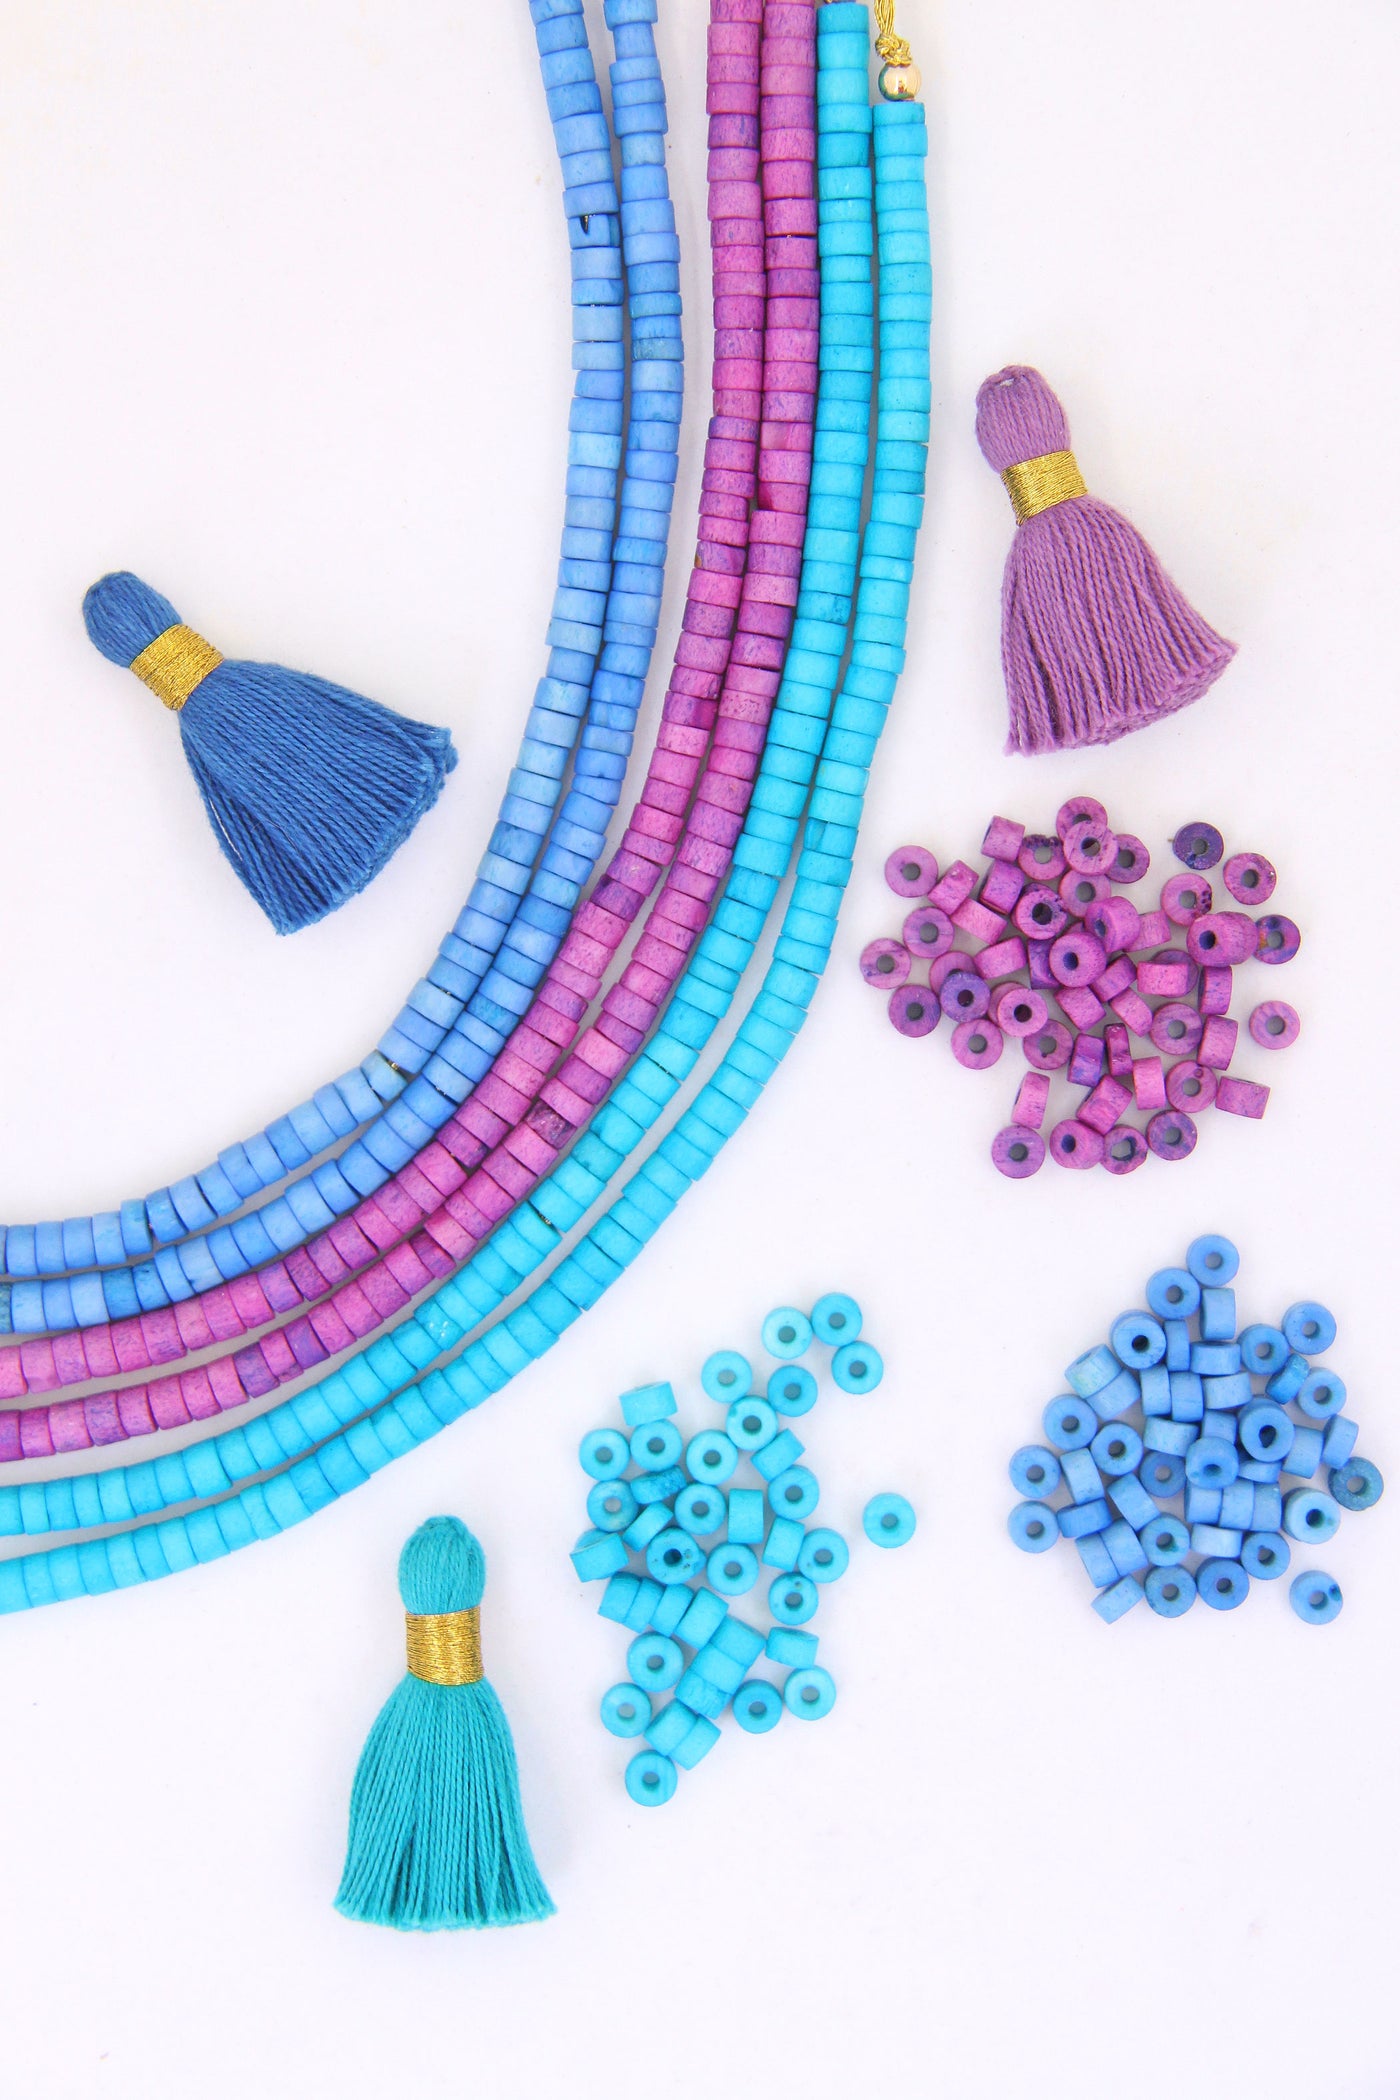 Natural Spacer Beads: 5x4mm Turquoise, Blue, Purple Heishi, Tube 